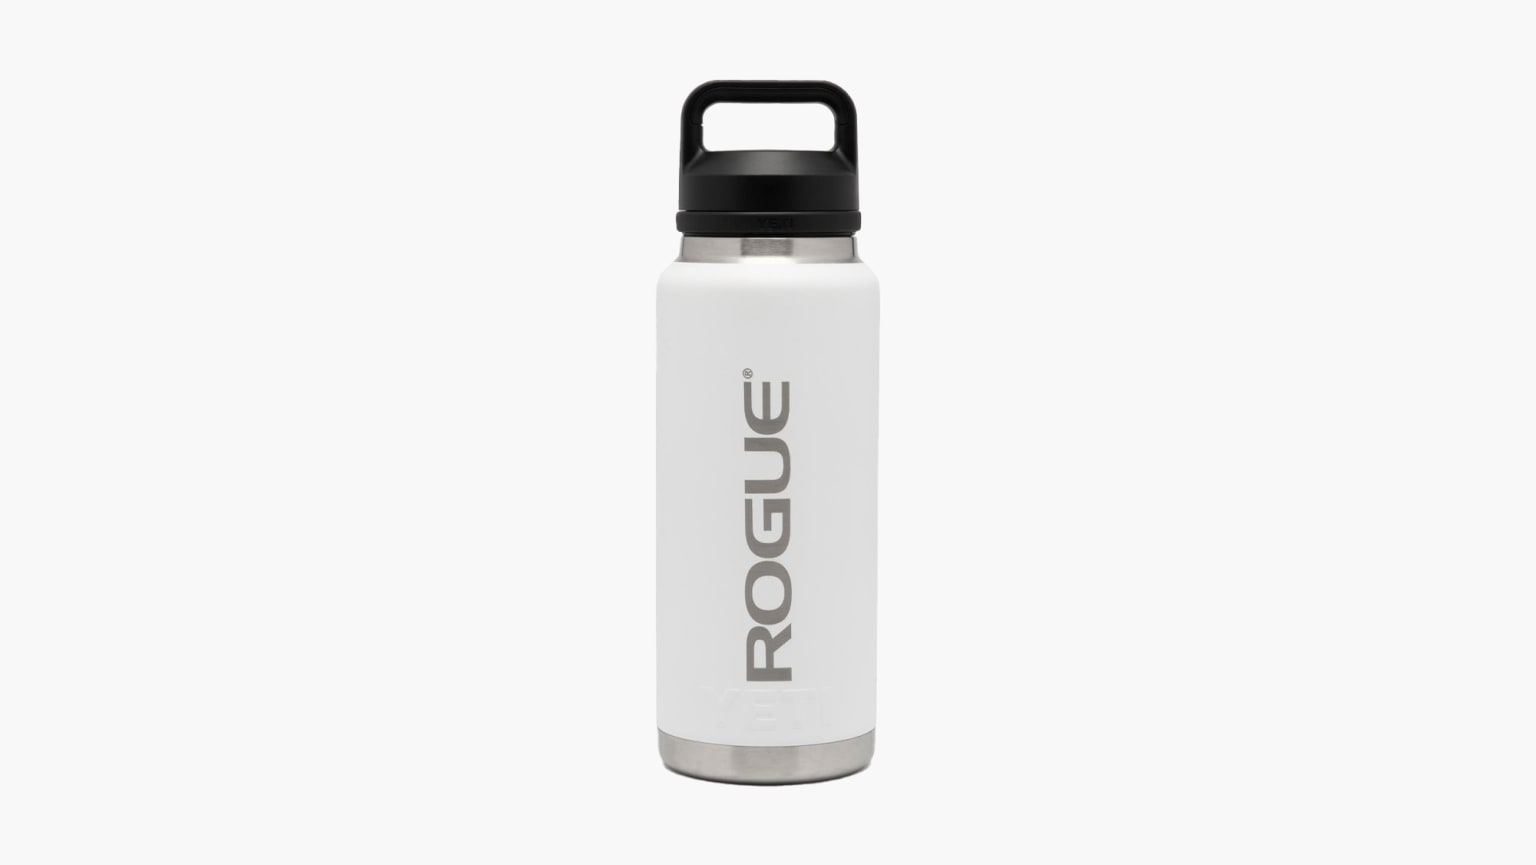 https://assets.roguefitness.com/f_auto,q_auto,c_limit,w_1536,b_rgb:f8f8f8/catalog/Gear%20and%20Accessories/Accessories/Shakers%20and%20Bottles/YT0051/YT0051-H_sygdbw.png